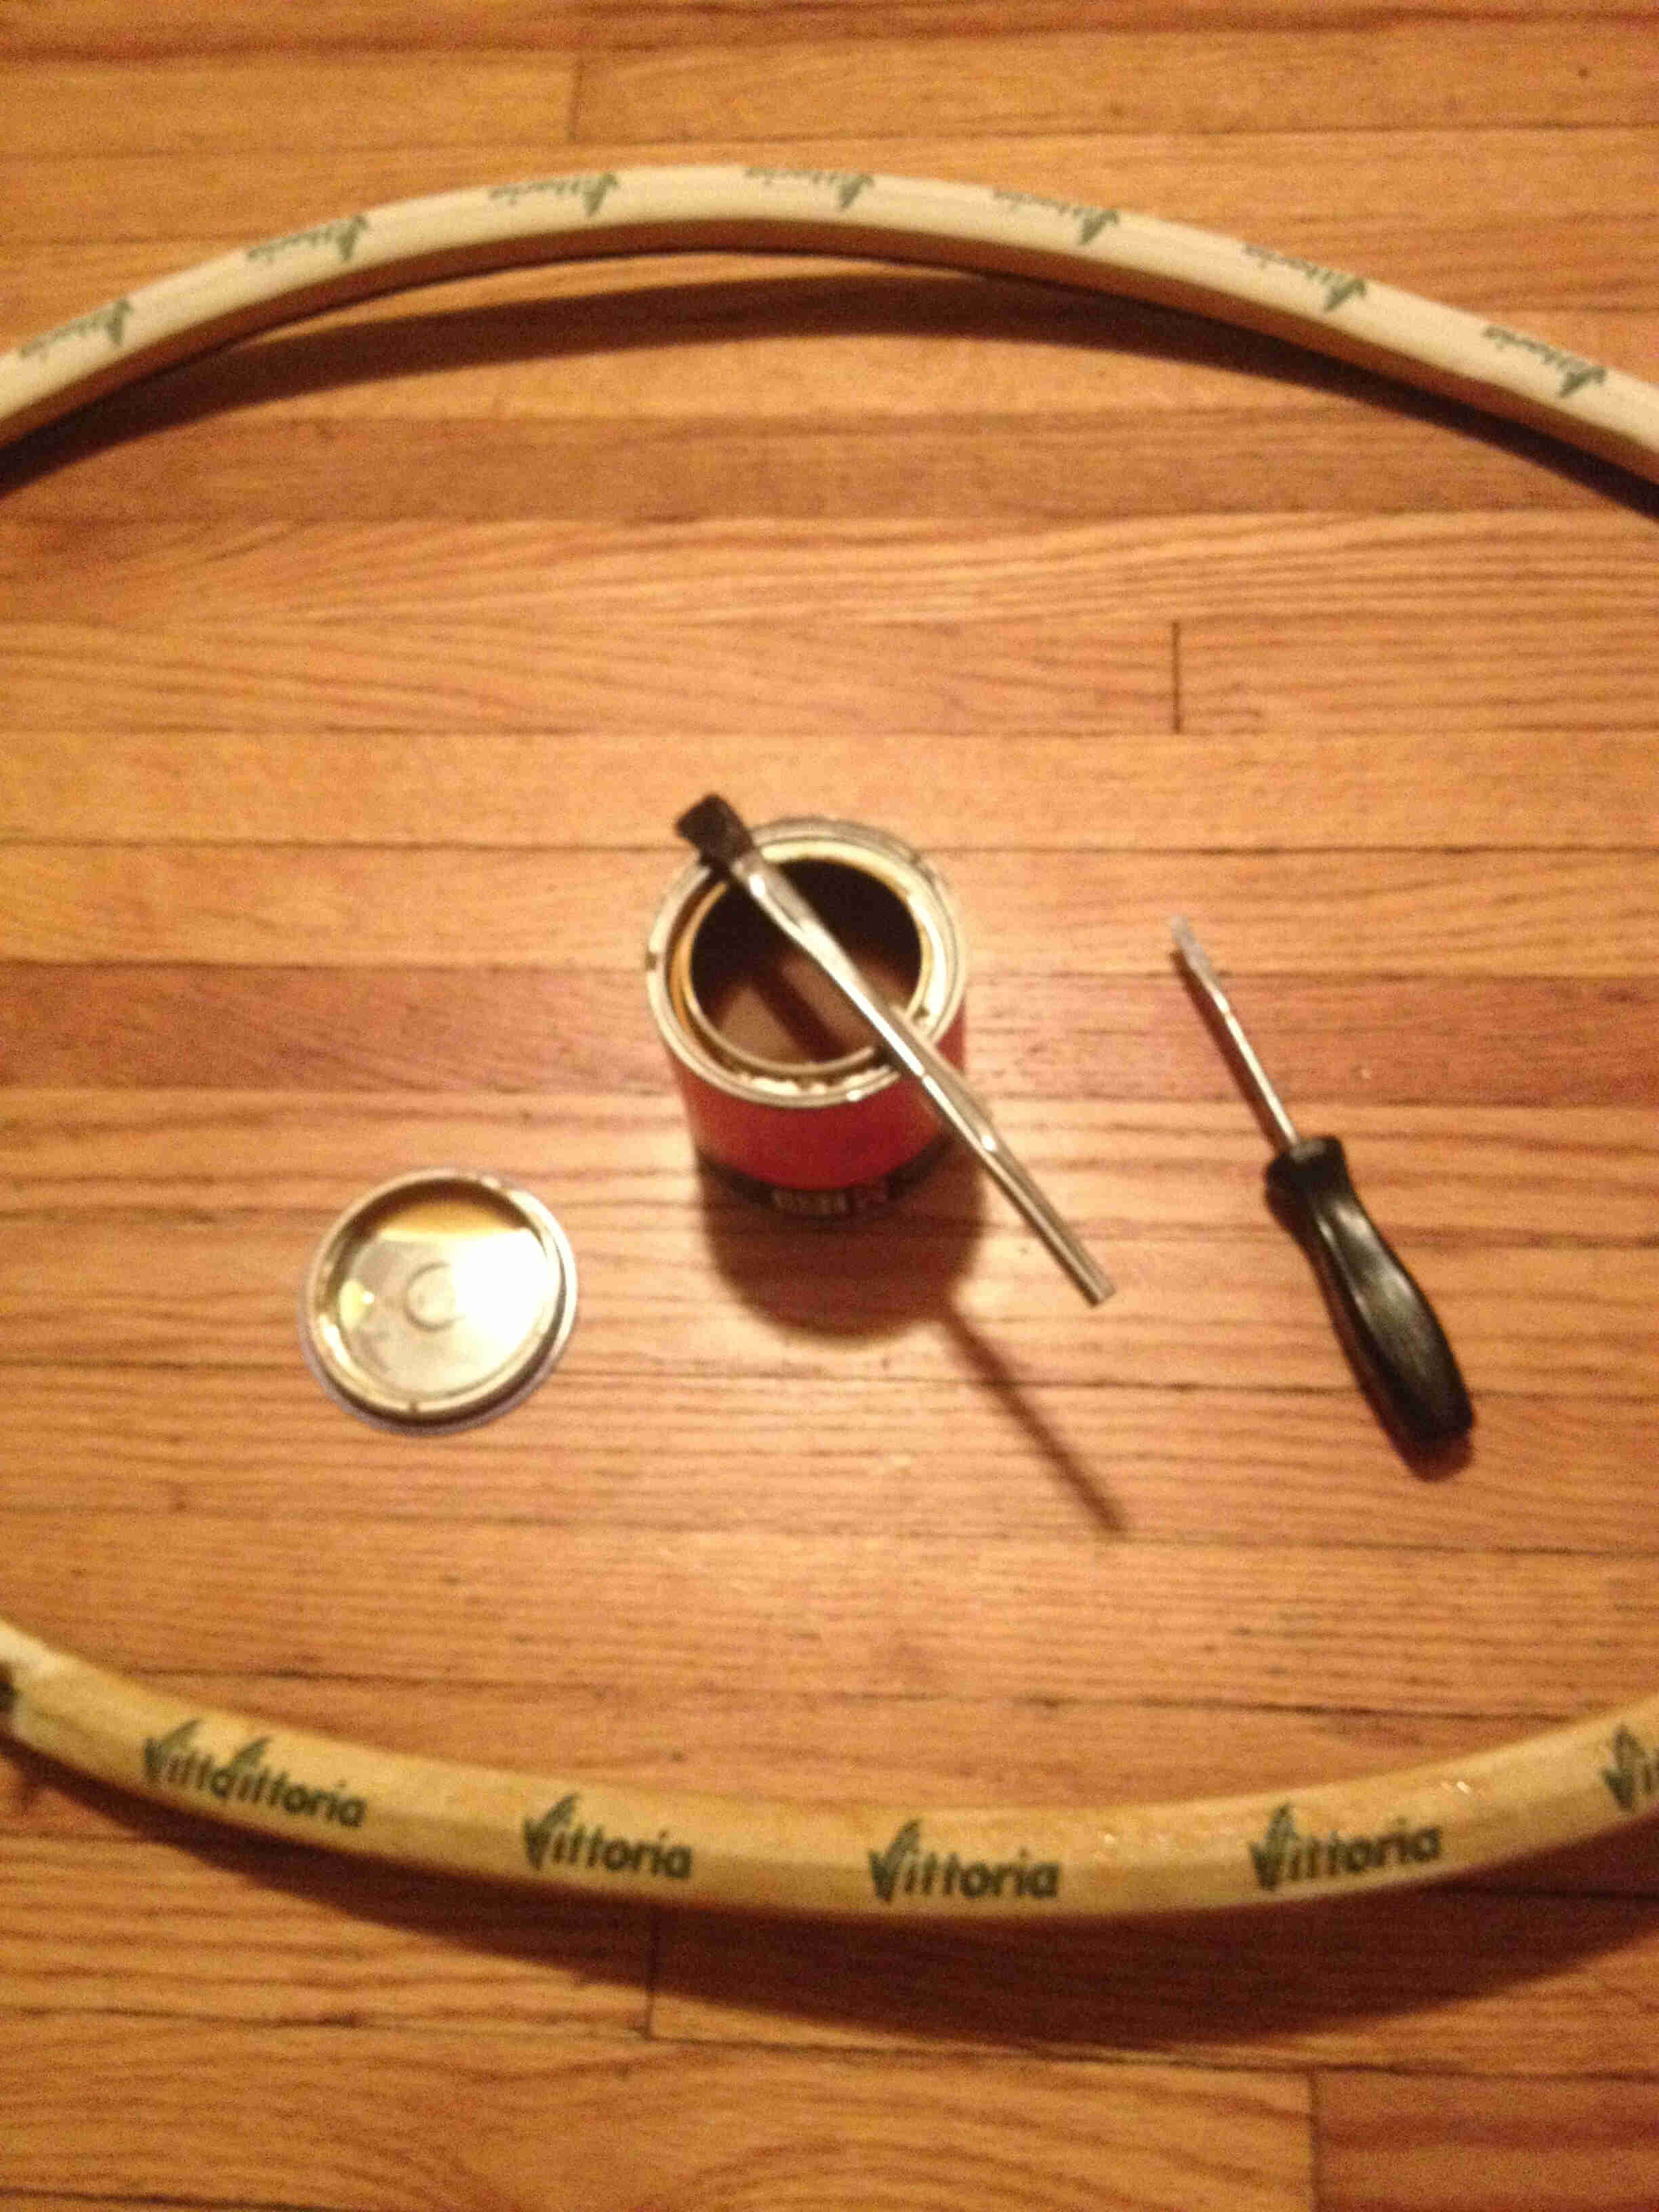 Downward view of a Vittoria bike tire, with a can and brush in the middle,  laying on a wood floor